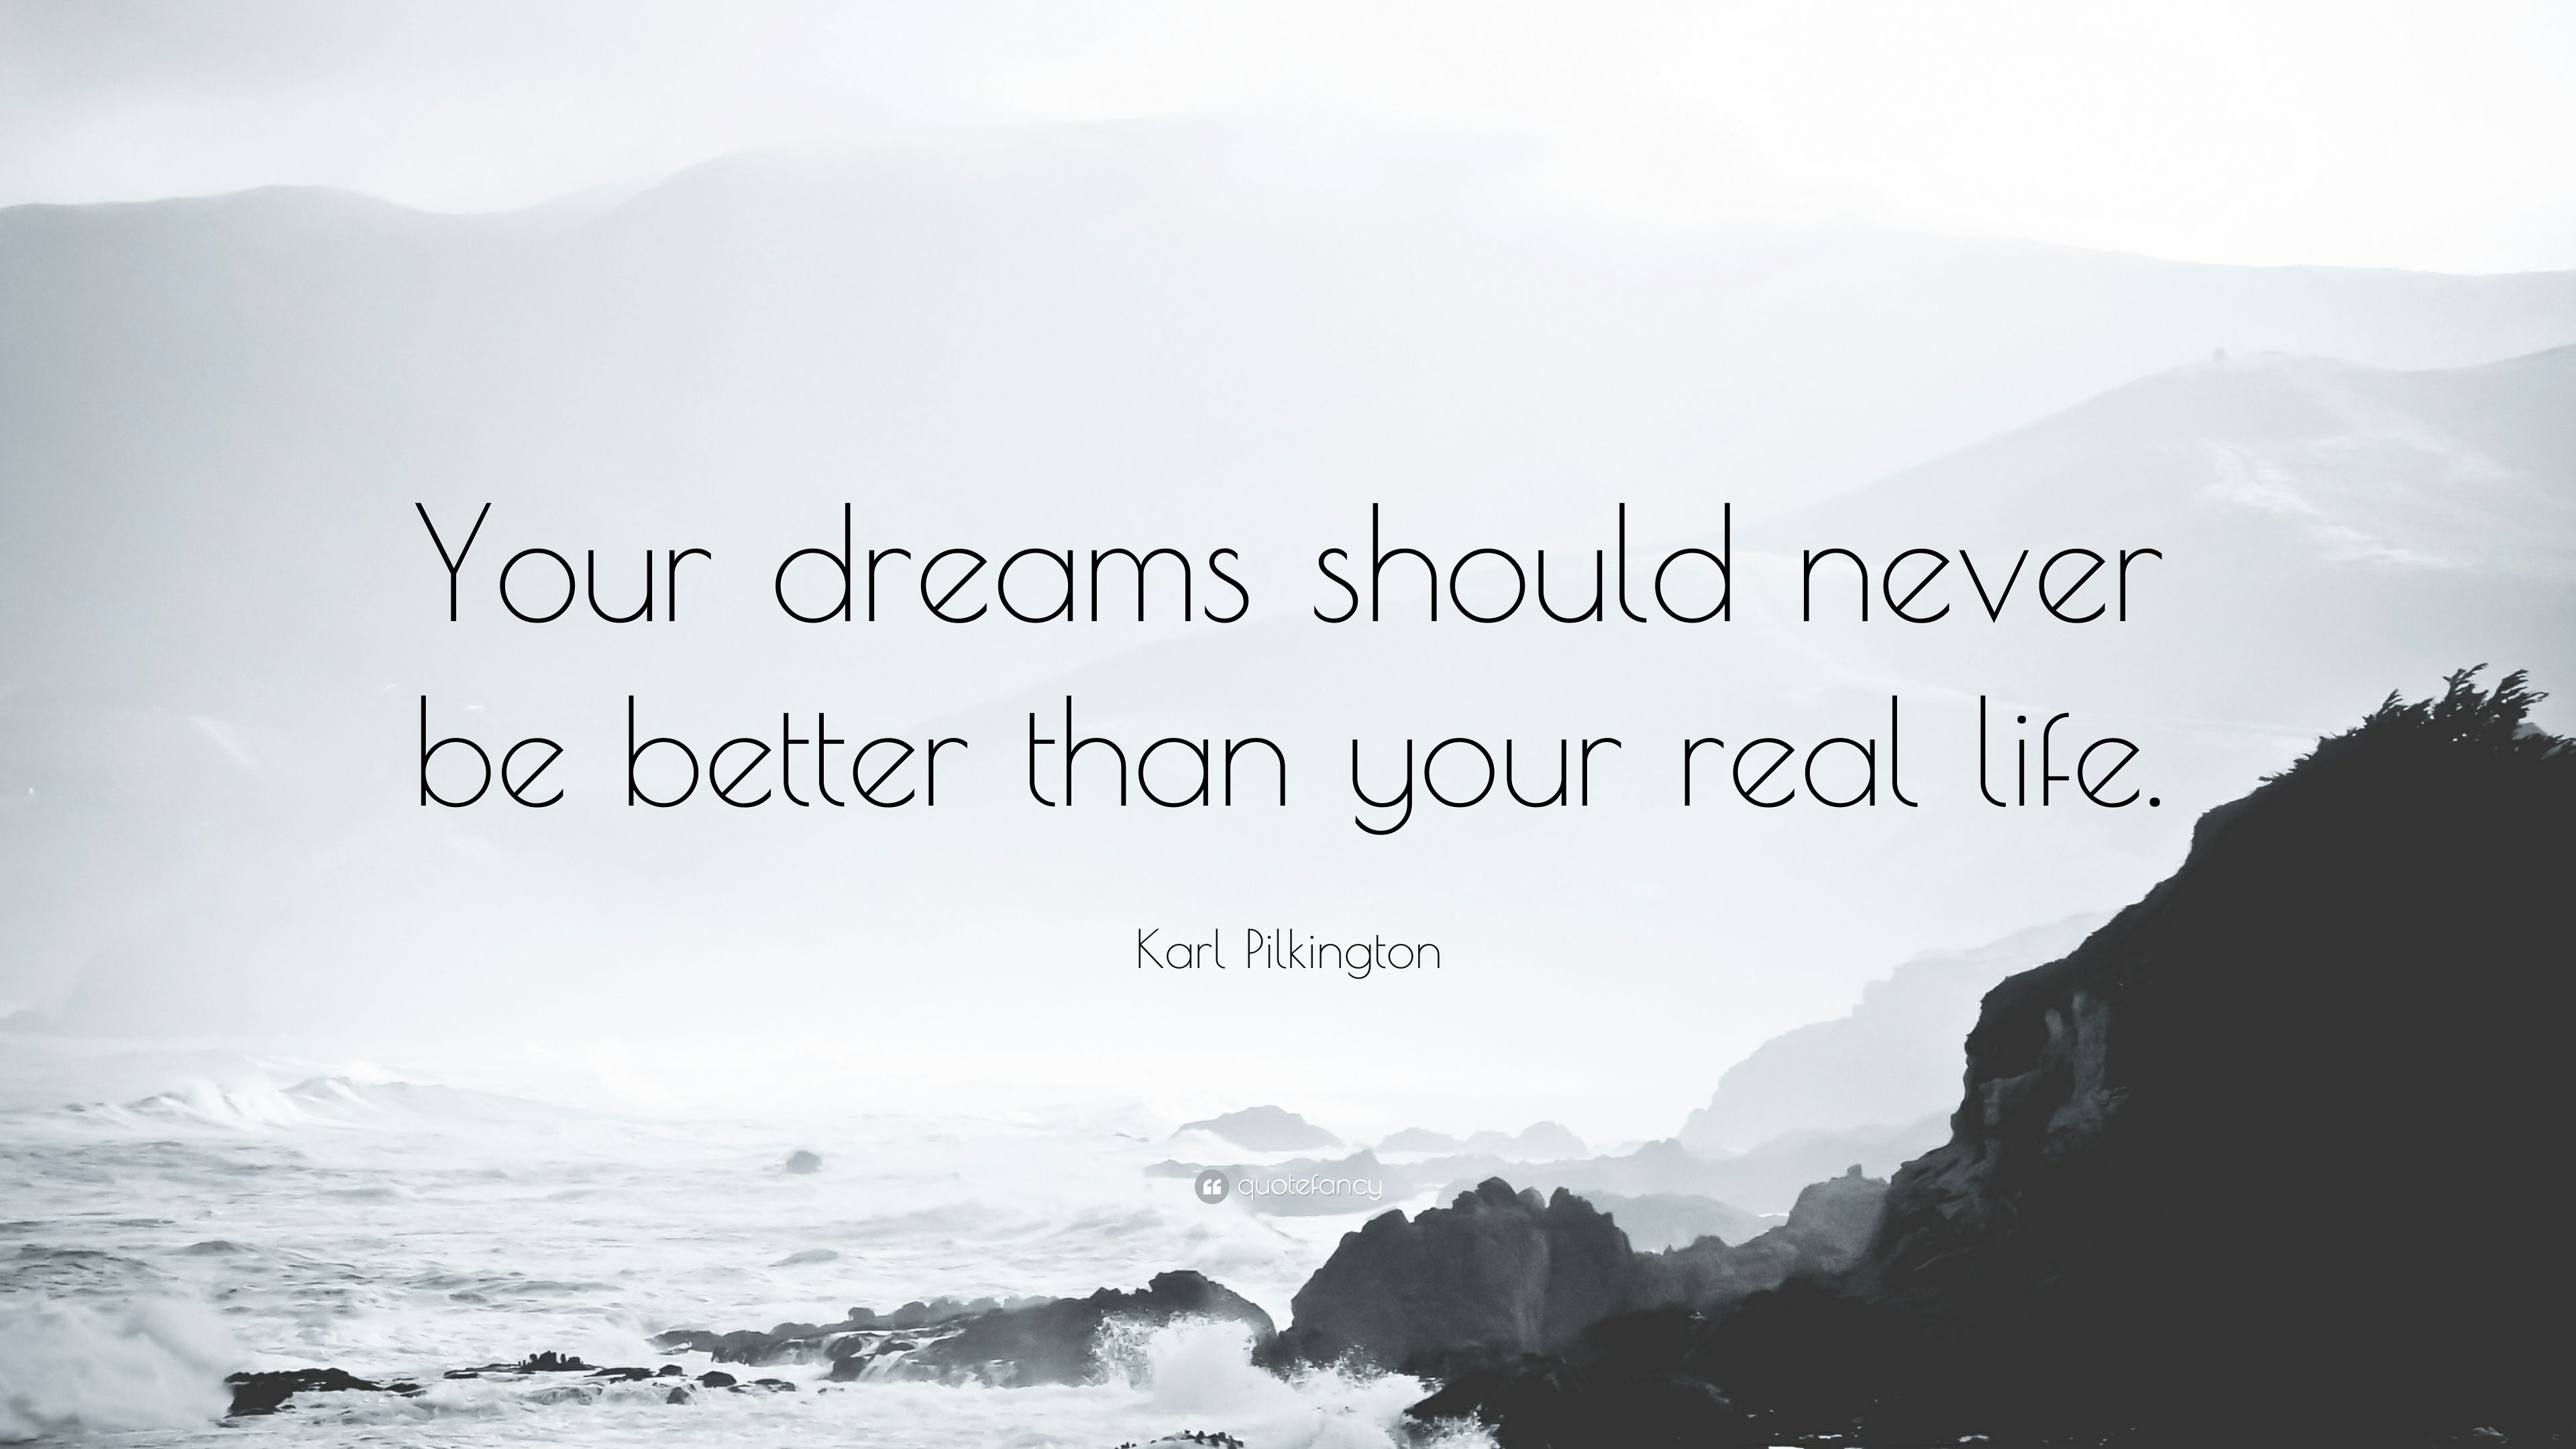 Karl Pilkington Quote: “Your dreams should never be better than your real life.” (7 wallpaper)